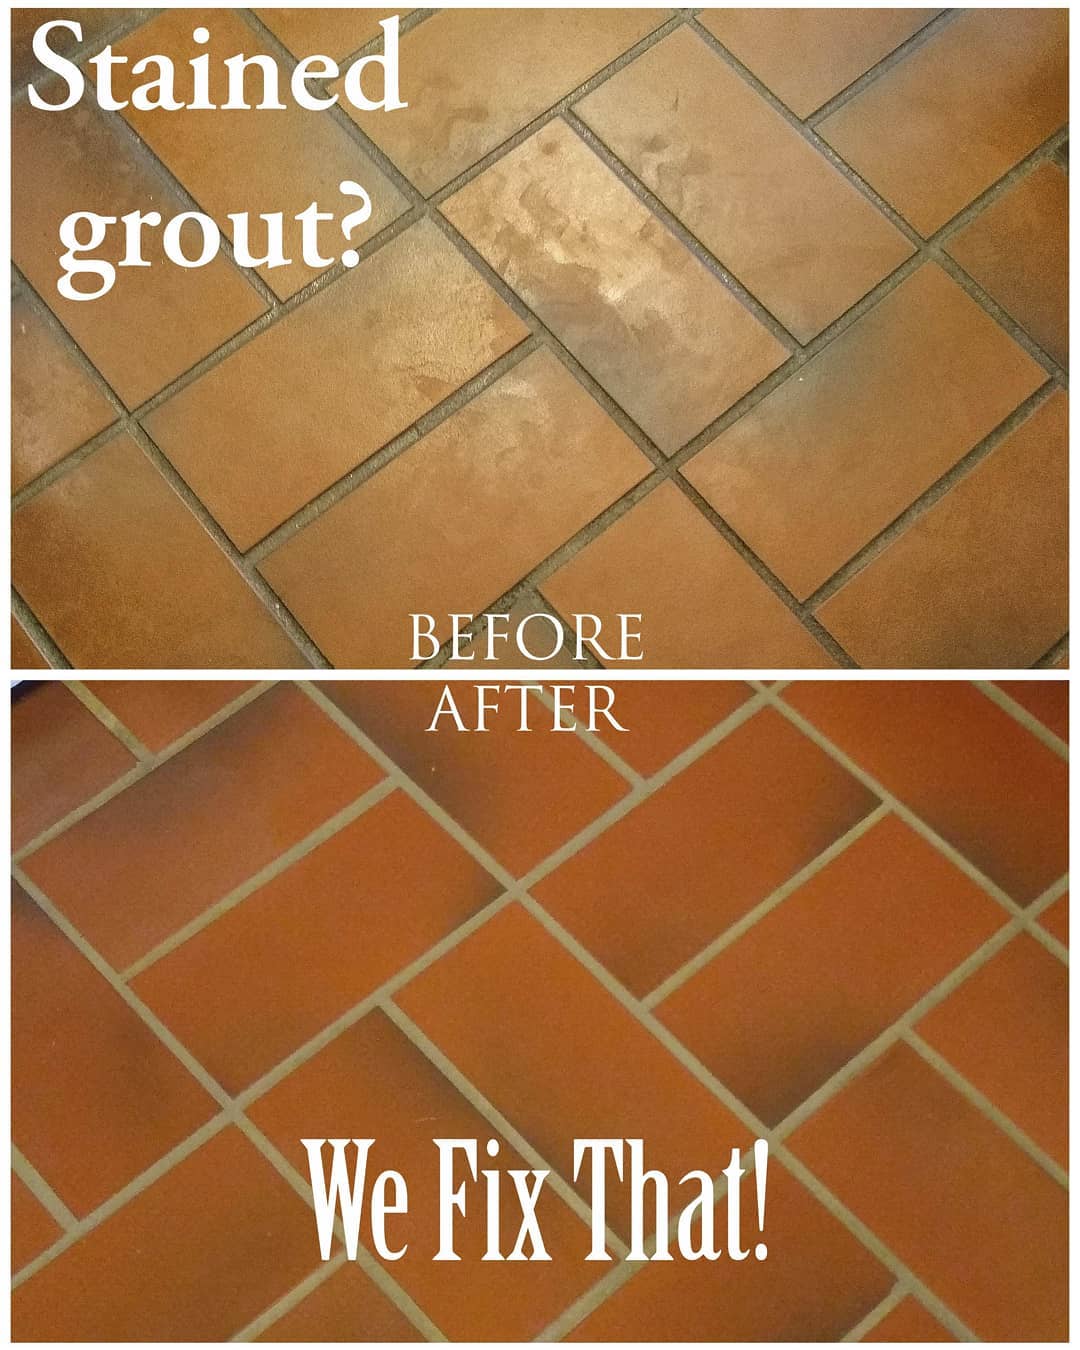 Stained grout